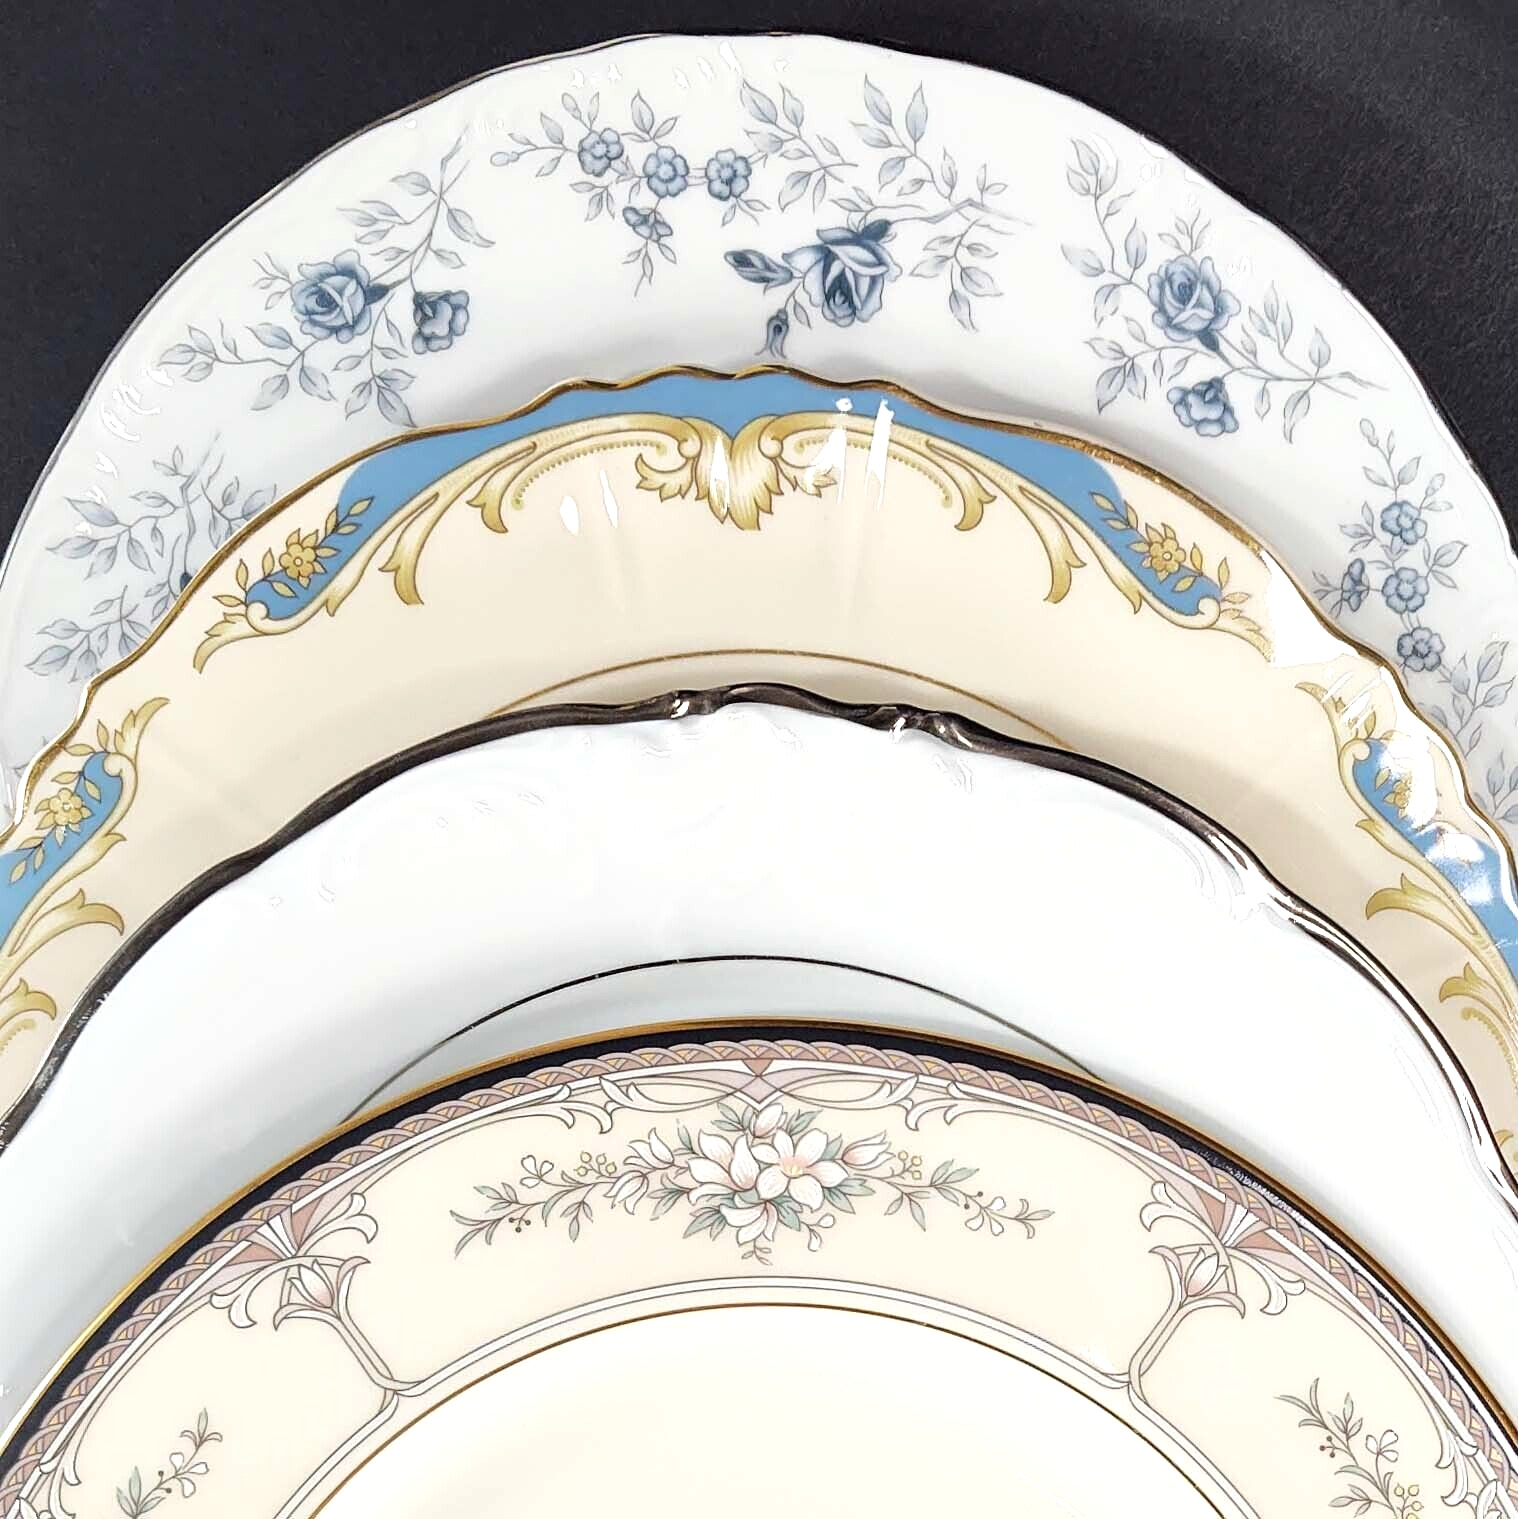 Mismatched Dinner Plates Vintage Floral China Plates Mixed Patterns Set of 4